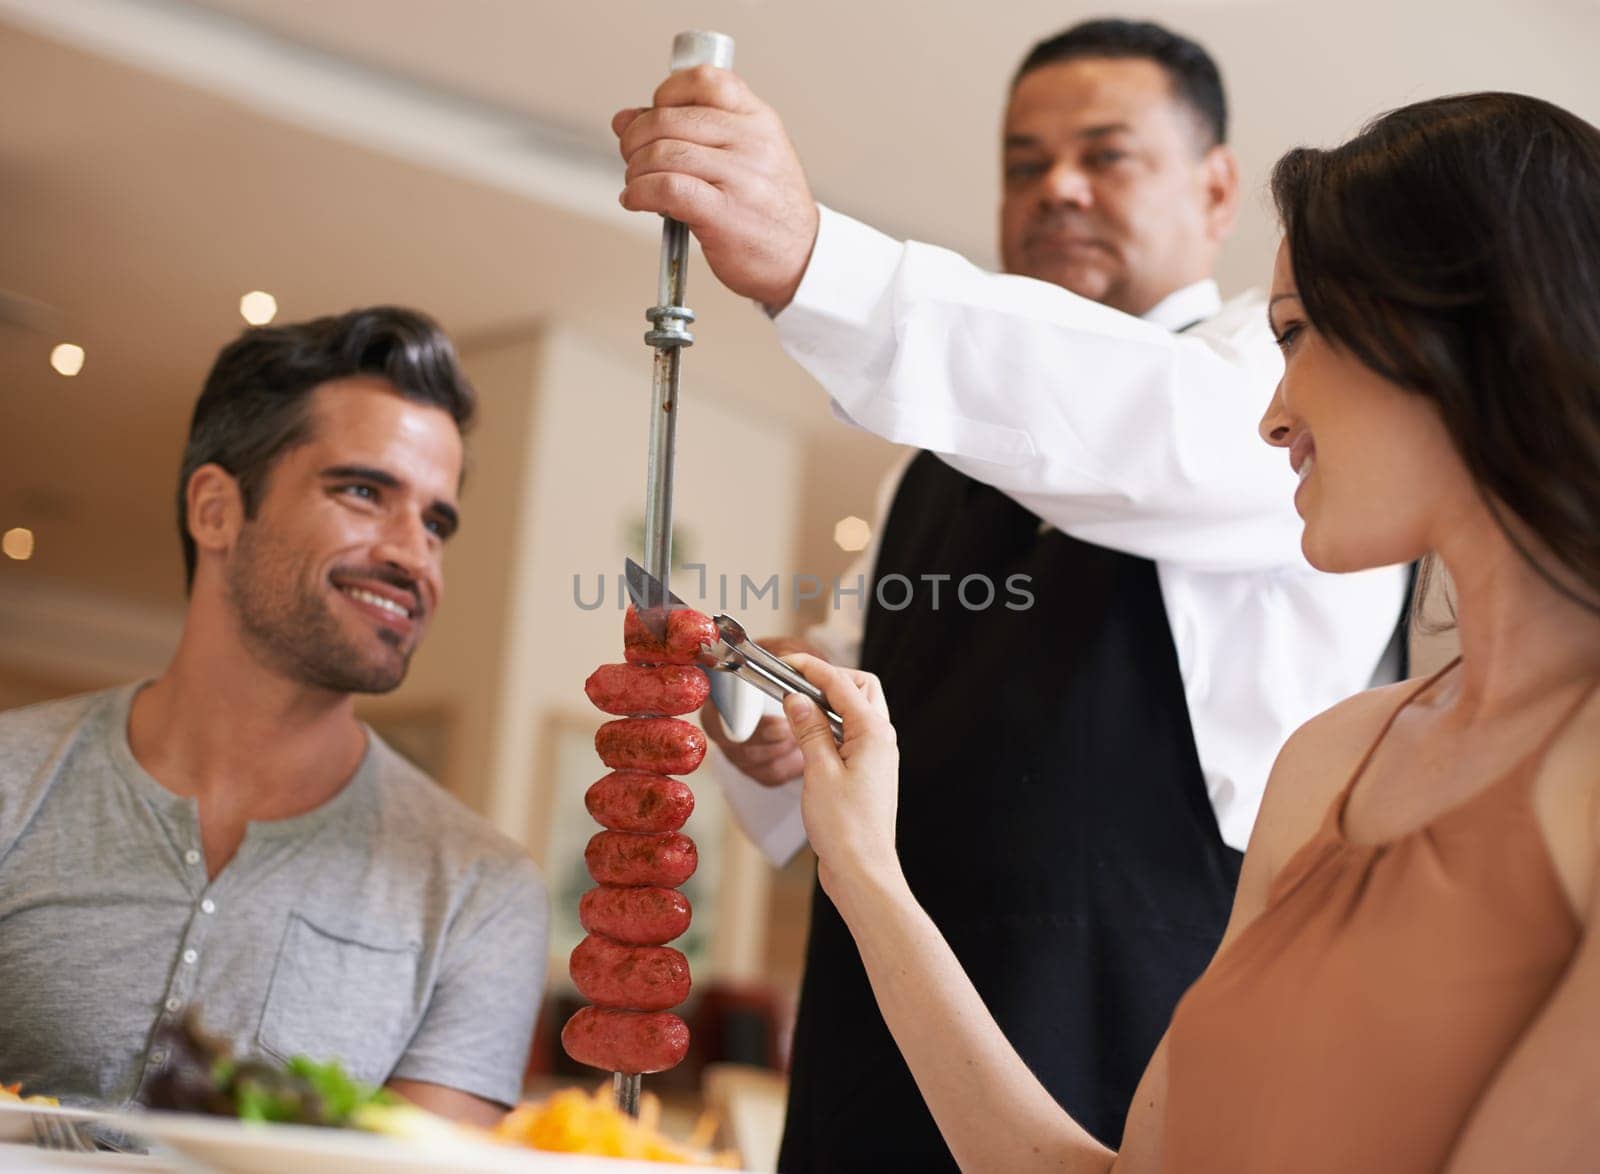 Food, date and romance with couple in restaurant together for celebration or eating espetada. Love, meat or dinner with happy young man and woman in fine dining hospitality establishment for service.